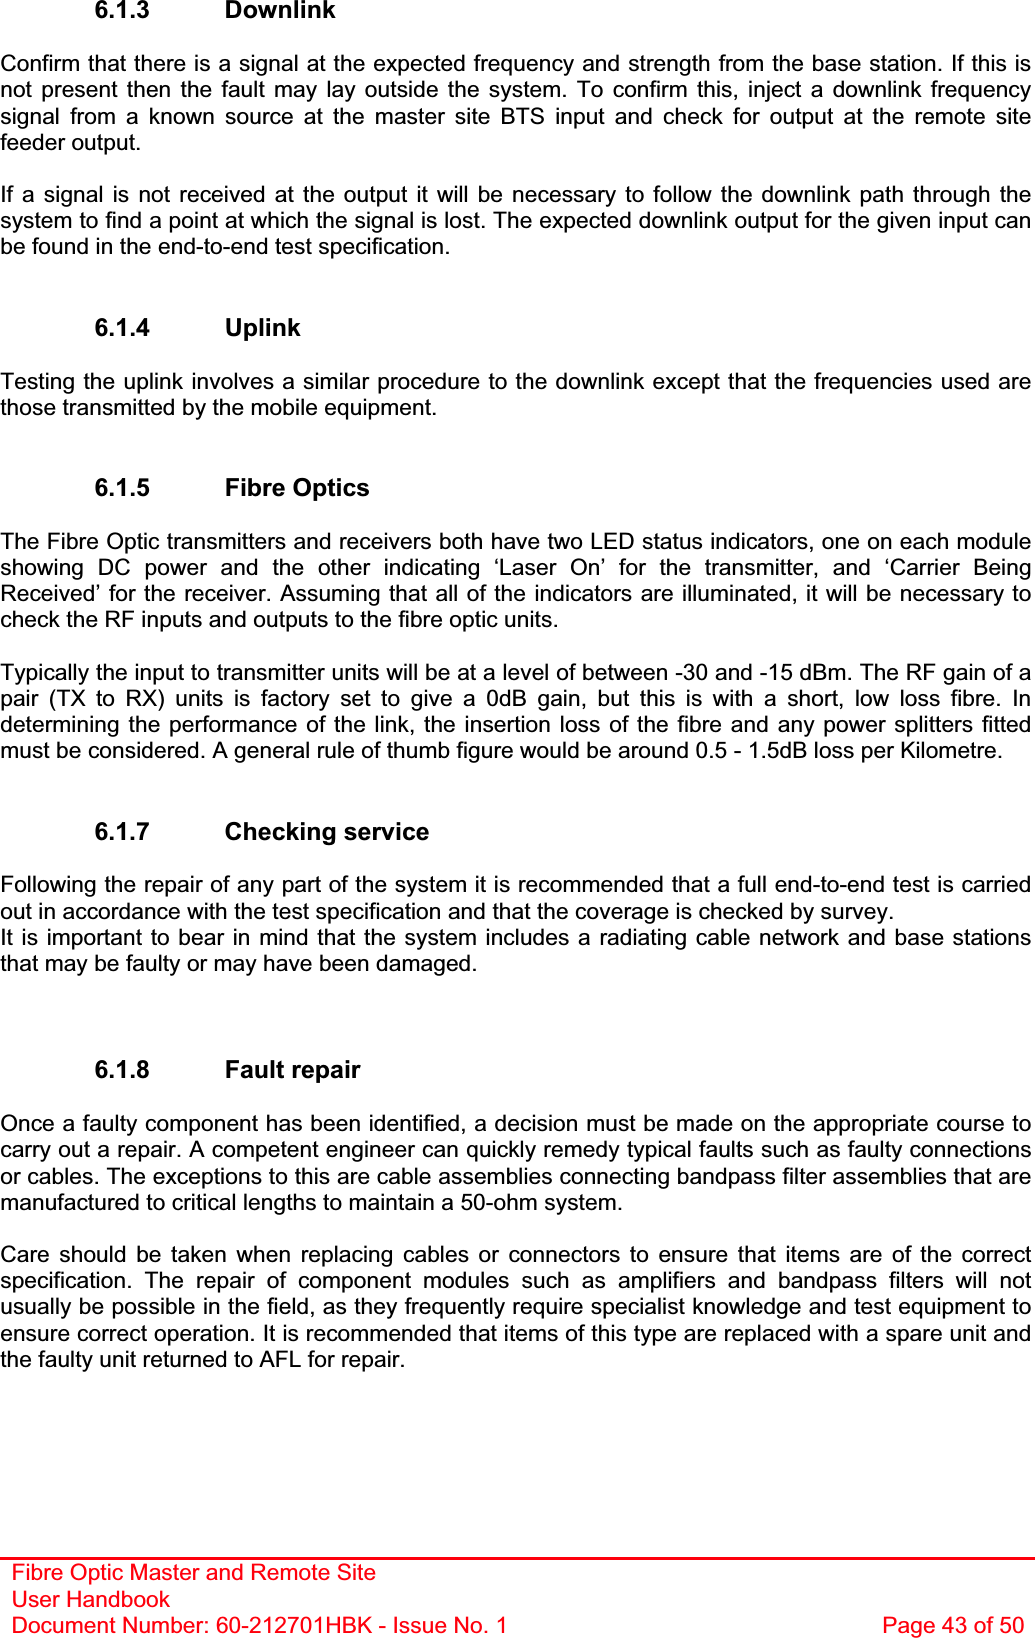 Fibre Optic Master and Remote Site User Handbook Document Number: 60-212701HBK - Issue No. 1  Page 43 of 506.1.3 Downlink Confirm that there is a signal at the expected frequency and strength from the base station. If this is not present then the fault may lay outside the system. To confirm this, inject a downlink frequency signal from a known source at the master site BTS input and check for output at the remote site feeder output. If a signal is not received at the output it will be necessary to follow the downlink path through the system to find a point at which the signal is lost. The expected downlink output for the given input can be found in the end-to-end test specification. 6.1.4 Uplink Testing the uplink involves a similar procedure to the downlink except that the frequencies used are those transmitted by the mobile equipment. 6.1.5 Fibre Optics The Fibre Optic transmitters and receivers both have two LED status indicators, one on each module showing DC power and the other indicating ‘Laser On’ for the transmitter, and ‘Carrier Being Received’ for the receiver. Assuming that all of the indicators are illuminated, it will be necessary to check the RF inputs and outputs to the fibre optic units. Typically the input to transmitter units will be at a level of between -30 and -15 dBm. The RF gain of a pair (TX to RX) units is factory set to give a 0dB gain, but this is with a short, low loss fibre. In determining the performance of the link, the insertion loss of the fibre and any power splitters fitted must be considered. A general rule of thumb figure would be around 0.5 - 1.5dB loss per Kilometre. 6.1.7 Checking service Following the repair of any part of the system it is recommended that a full end-to-end test is carried out in accordance with the test specification and that the coverage is checked by survey. It is important to bear in mind that the system includes a radiating cable network and base stations that may be faulty or may have been damaged. 6.1.8 Fault repair Once a faulty component has been identified, a decision must be made on the appropriate course to carry out a repair. A competent engineer can quickly remedy typical faults such as faulty connections or cables. The exceptions to this are cable assemblies connecting bandpass filter assemblies that are manufactured to critical lengths to maintain a 50-ohm system.Care should be taken when replacing cables or connectors to ensure that items are of the correct specification. The repair of component modules such as amplifiers and bandpass filters will not usually be possible in the field, as they frequently require specialist knowledge and test equipment to ensure correct operation. It is recommended that items of this type are replaced with a spare unit and the faulty unit returned to AFL for repair. 